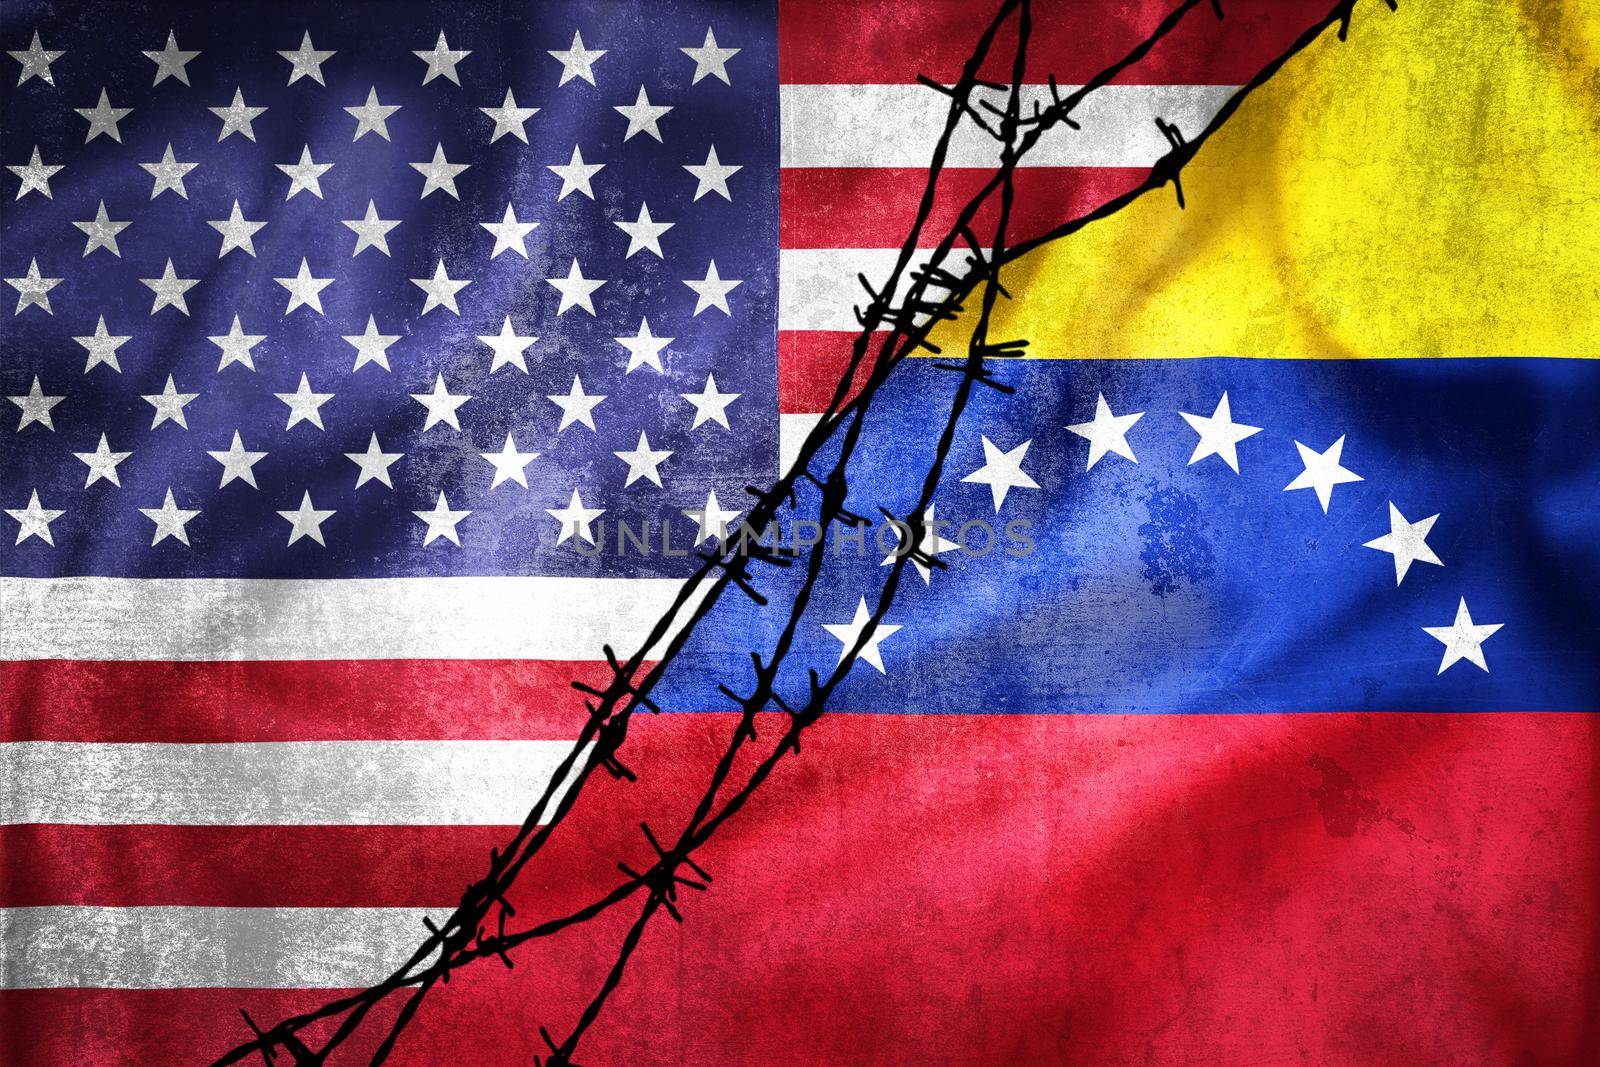 Grunge flags of USA and Venezuela divided by barb wire illustration by xbrchx